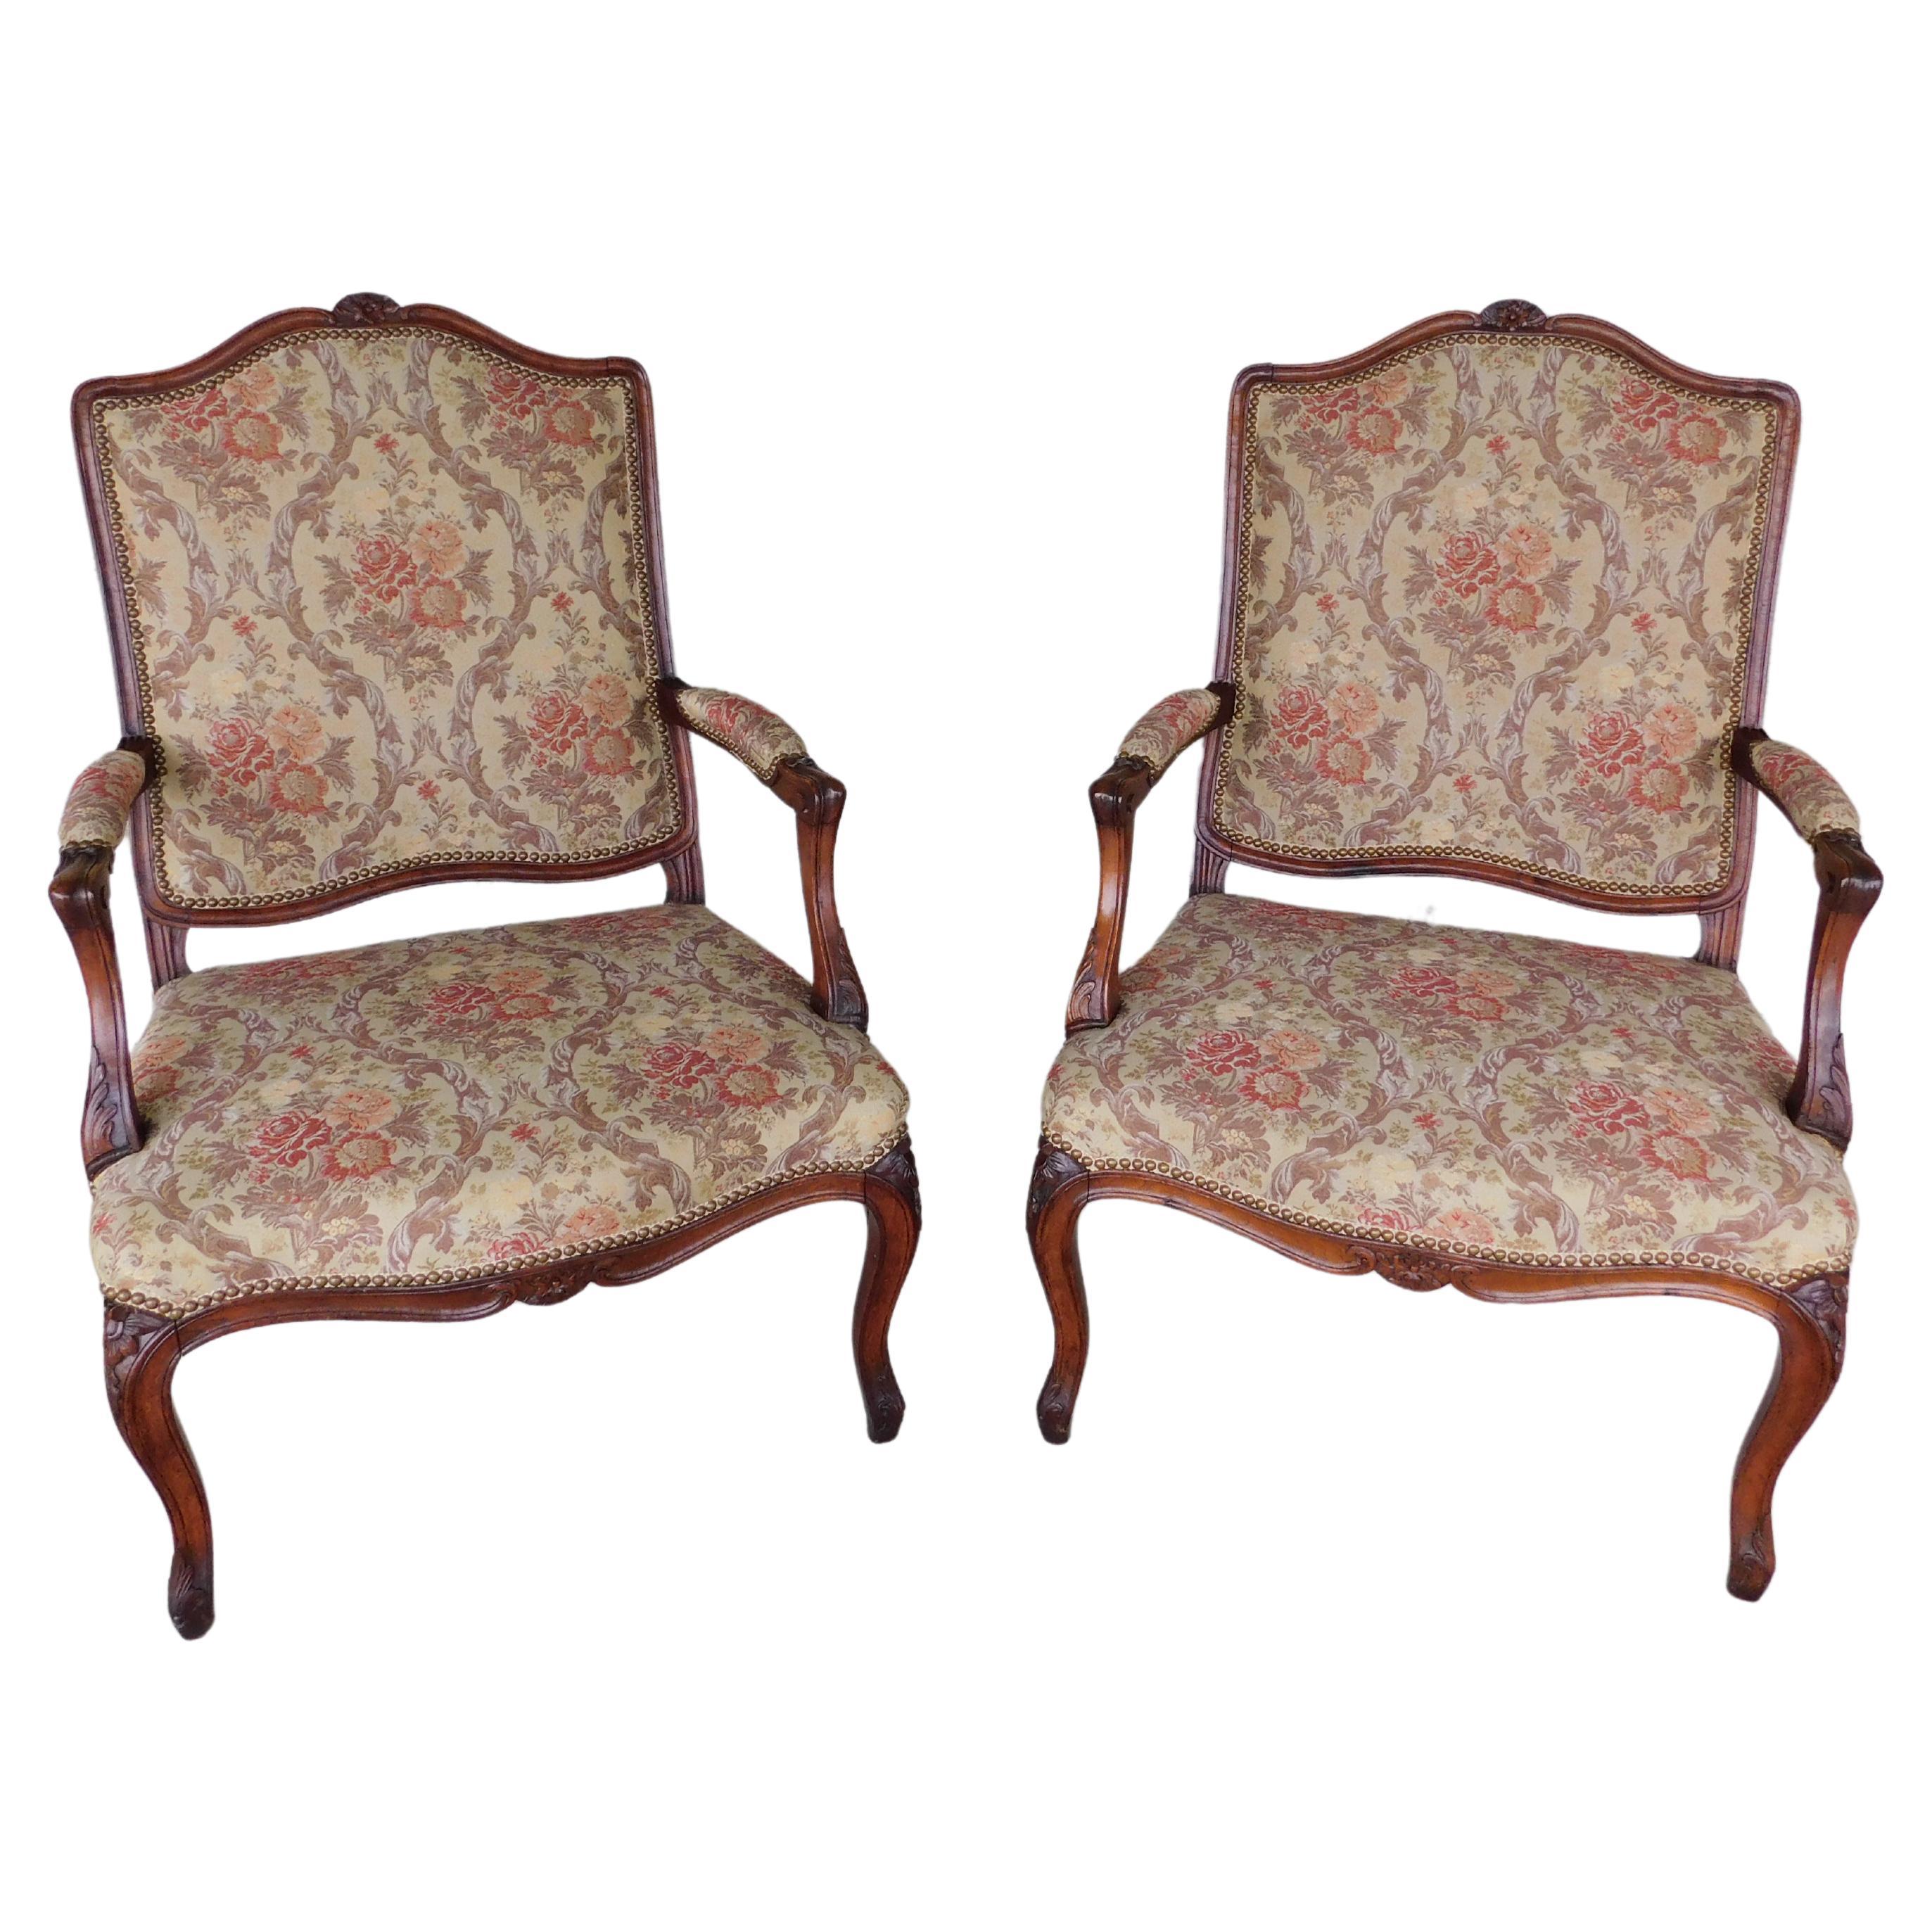 Vintage French Louis XV Style Fauteuil Chairs  - a Pair For Sale